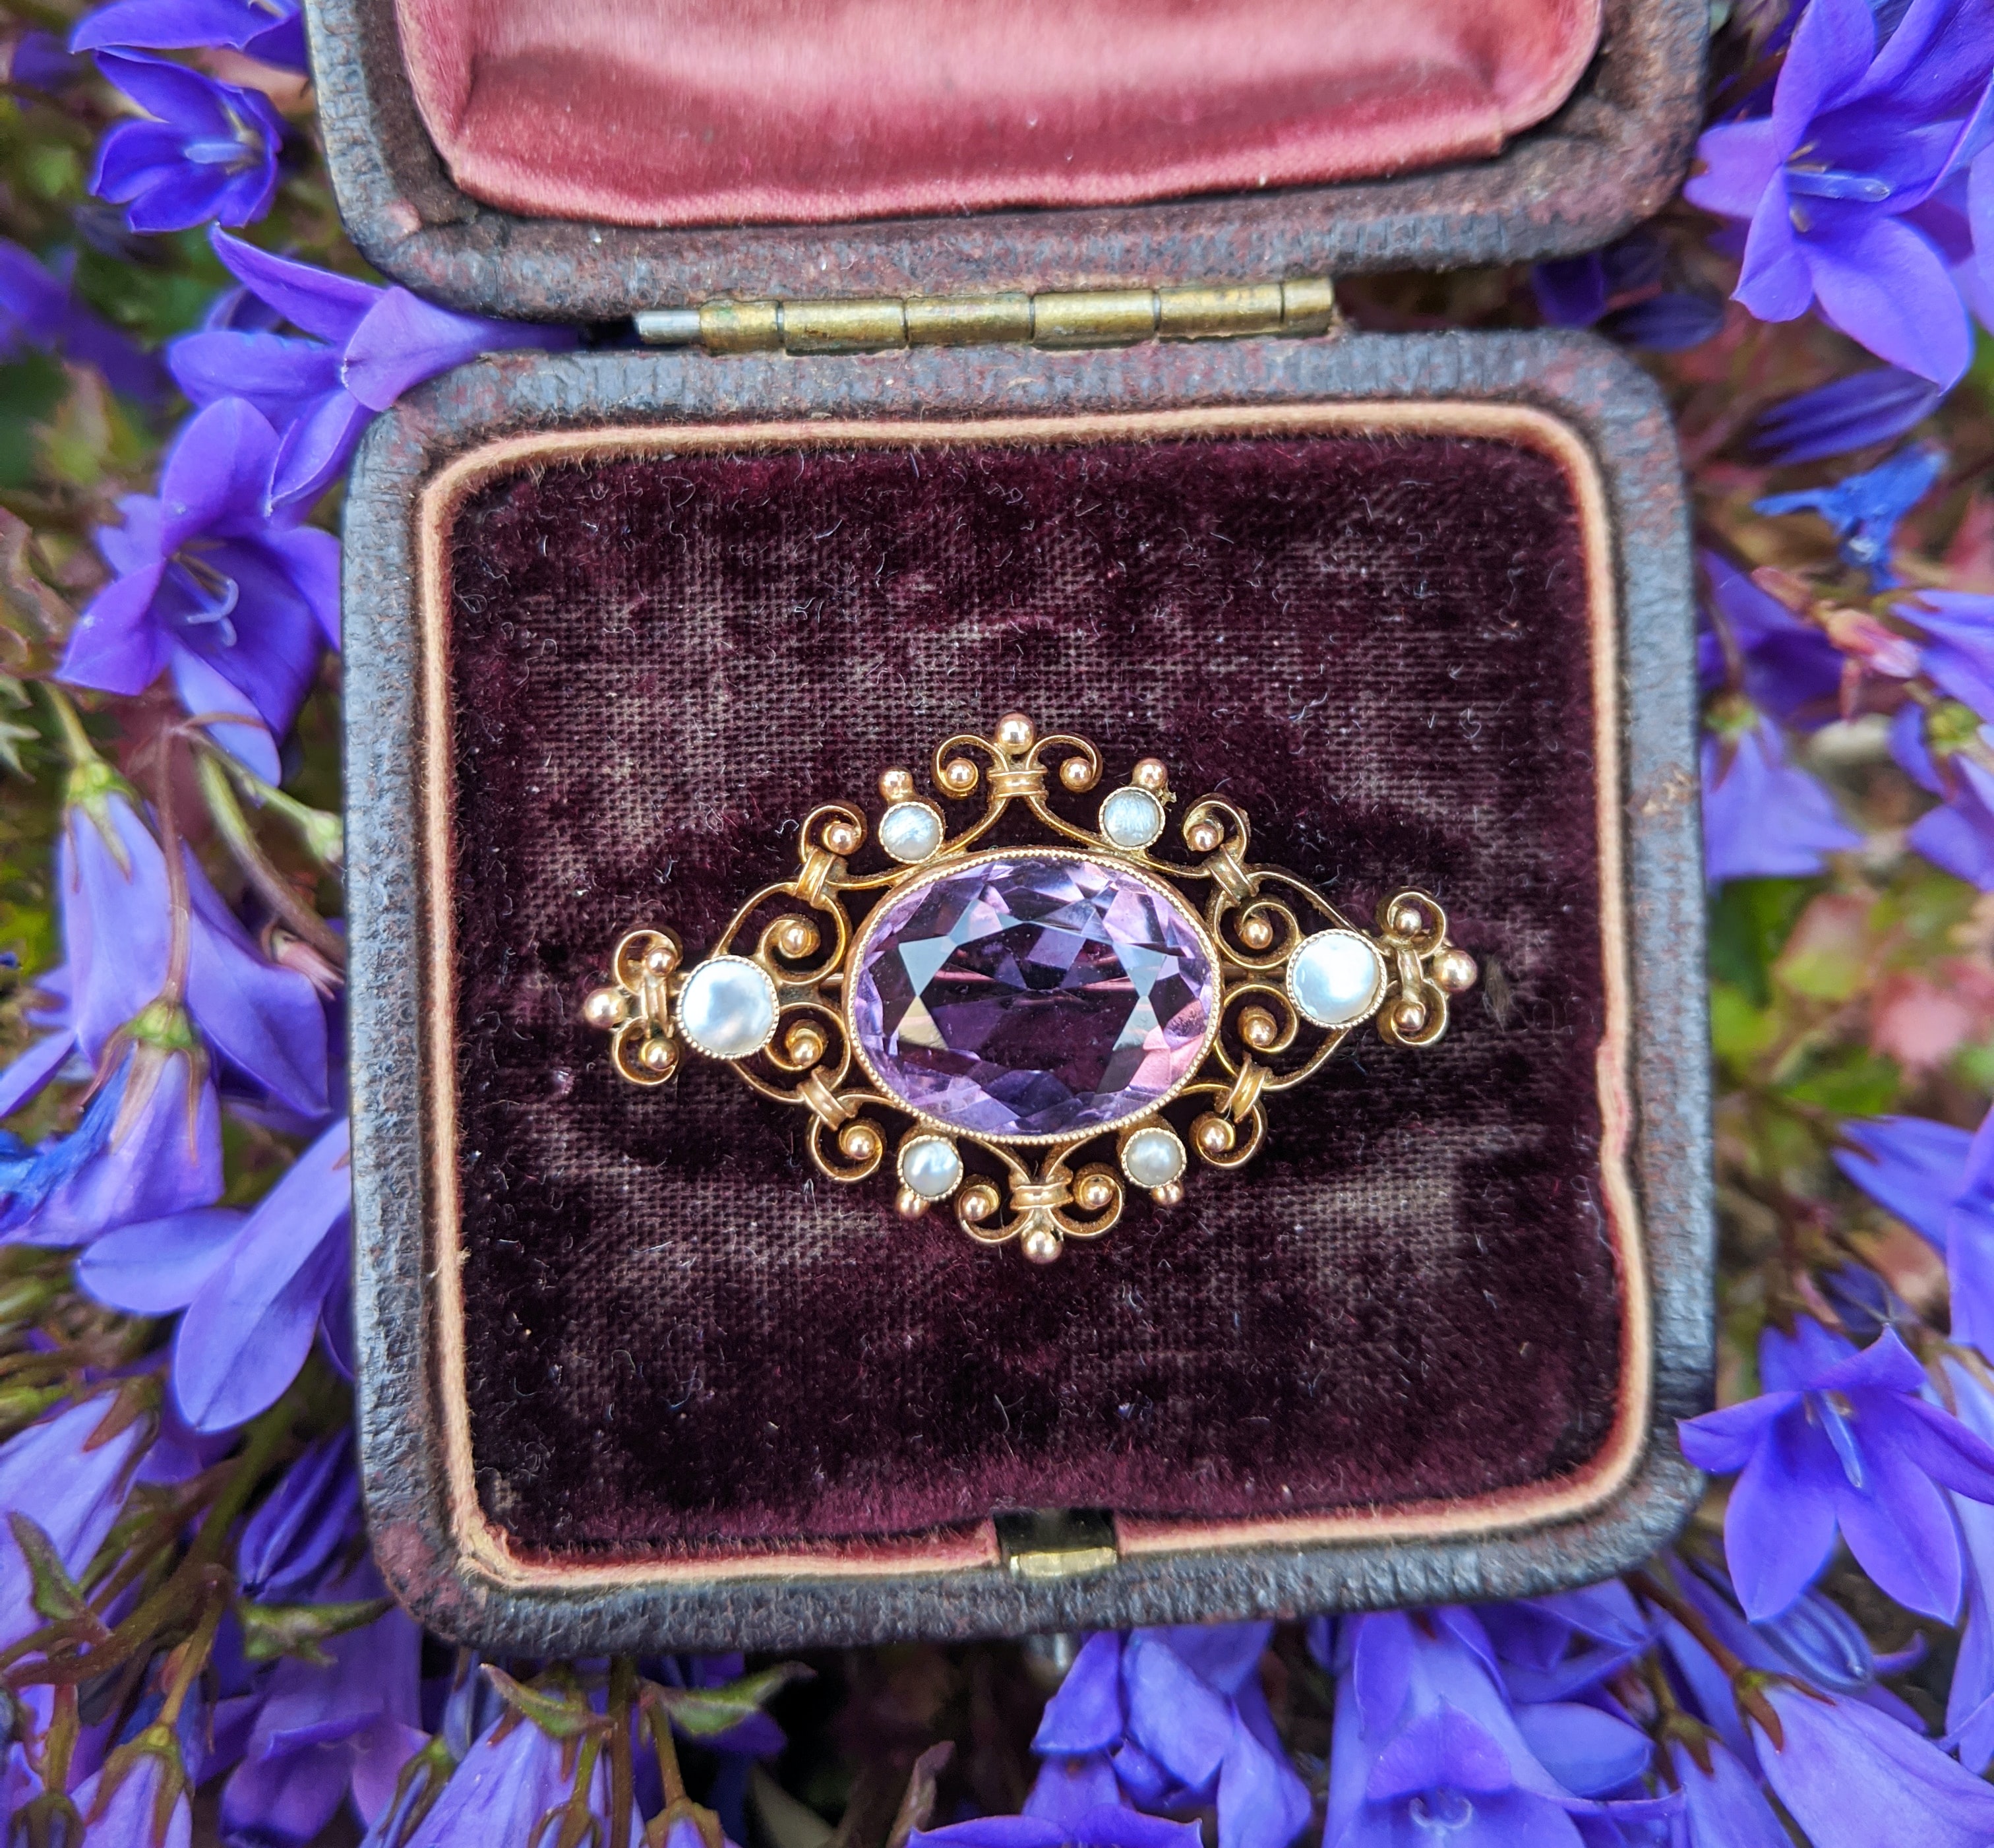 How Do I know if My Vintage Jewelry is Valuable?